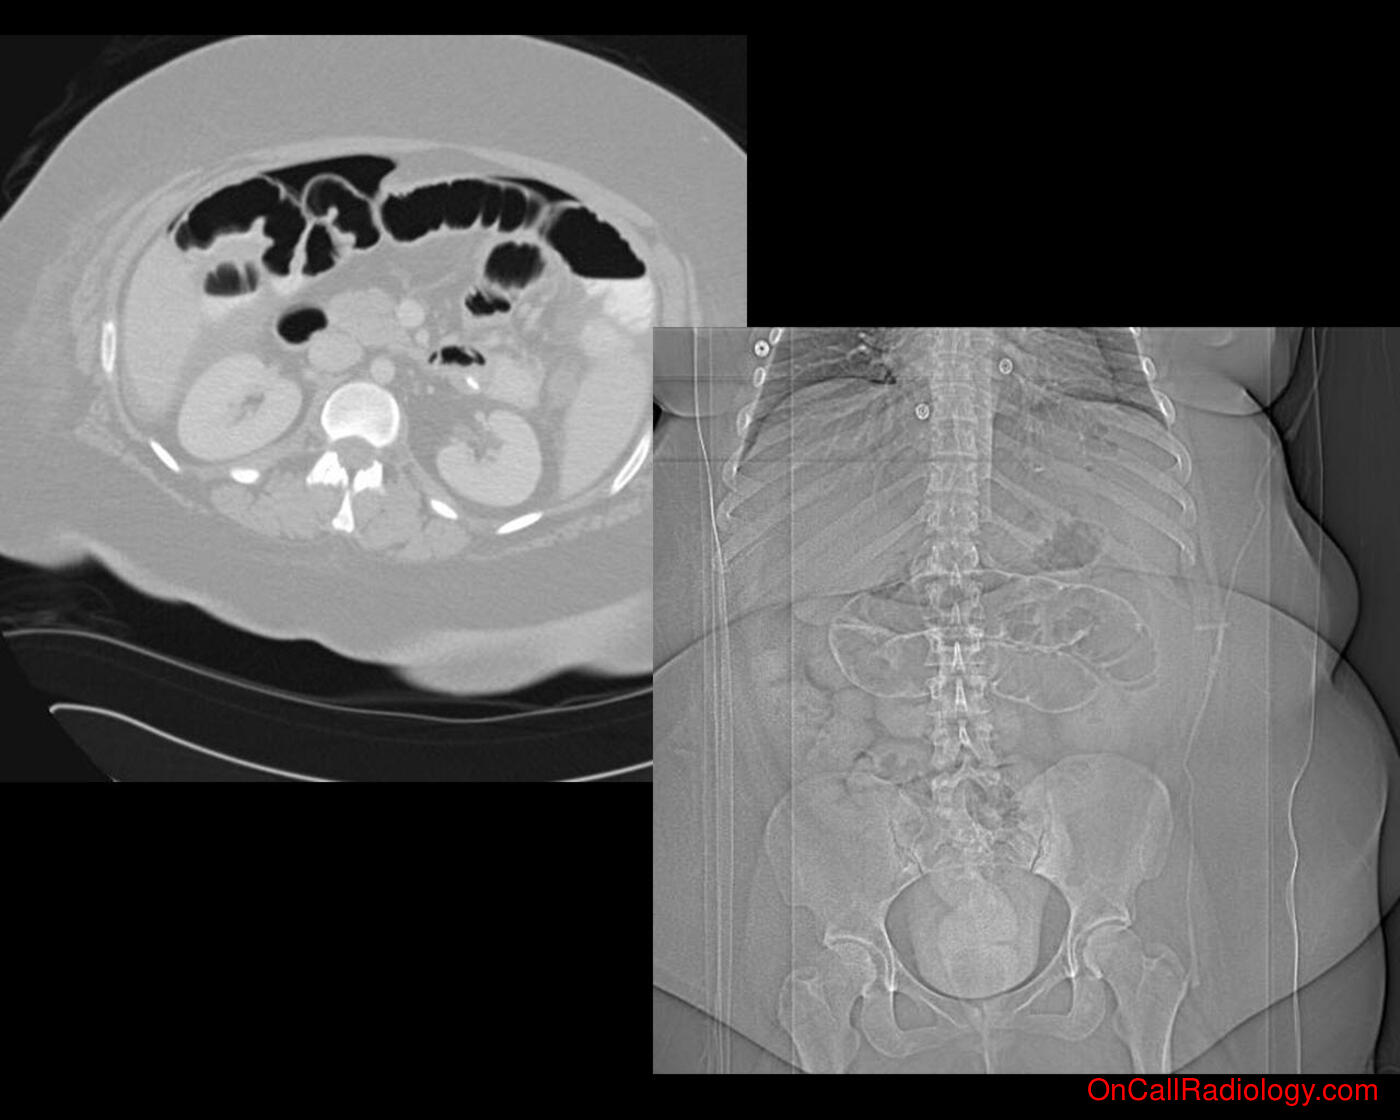 Air where it not belongs (SBO with free intraabdominal air  - Plain film, Radiograph, CT, Computed tomography)